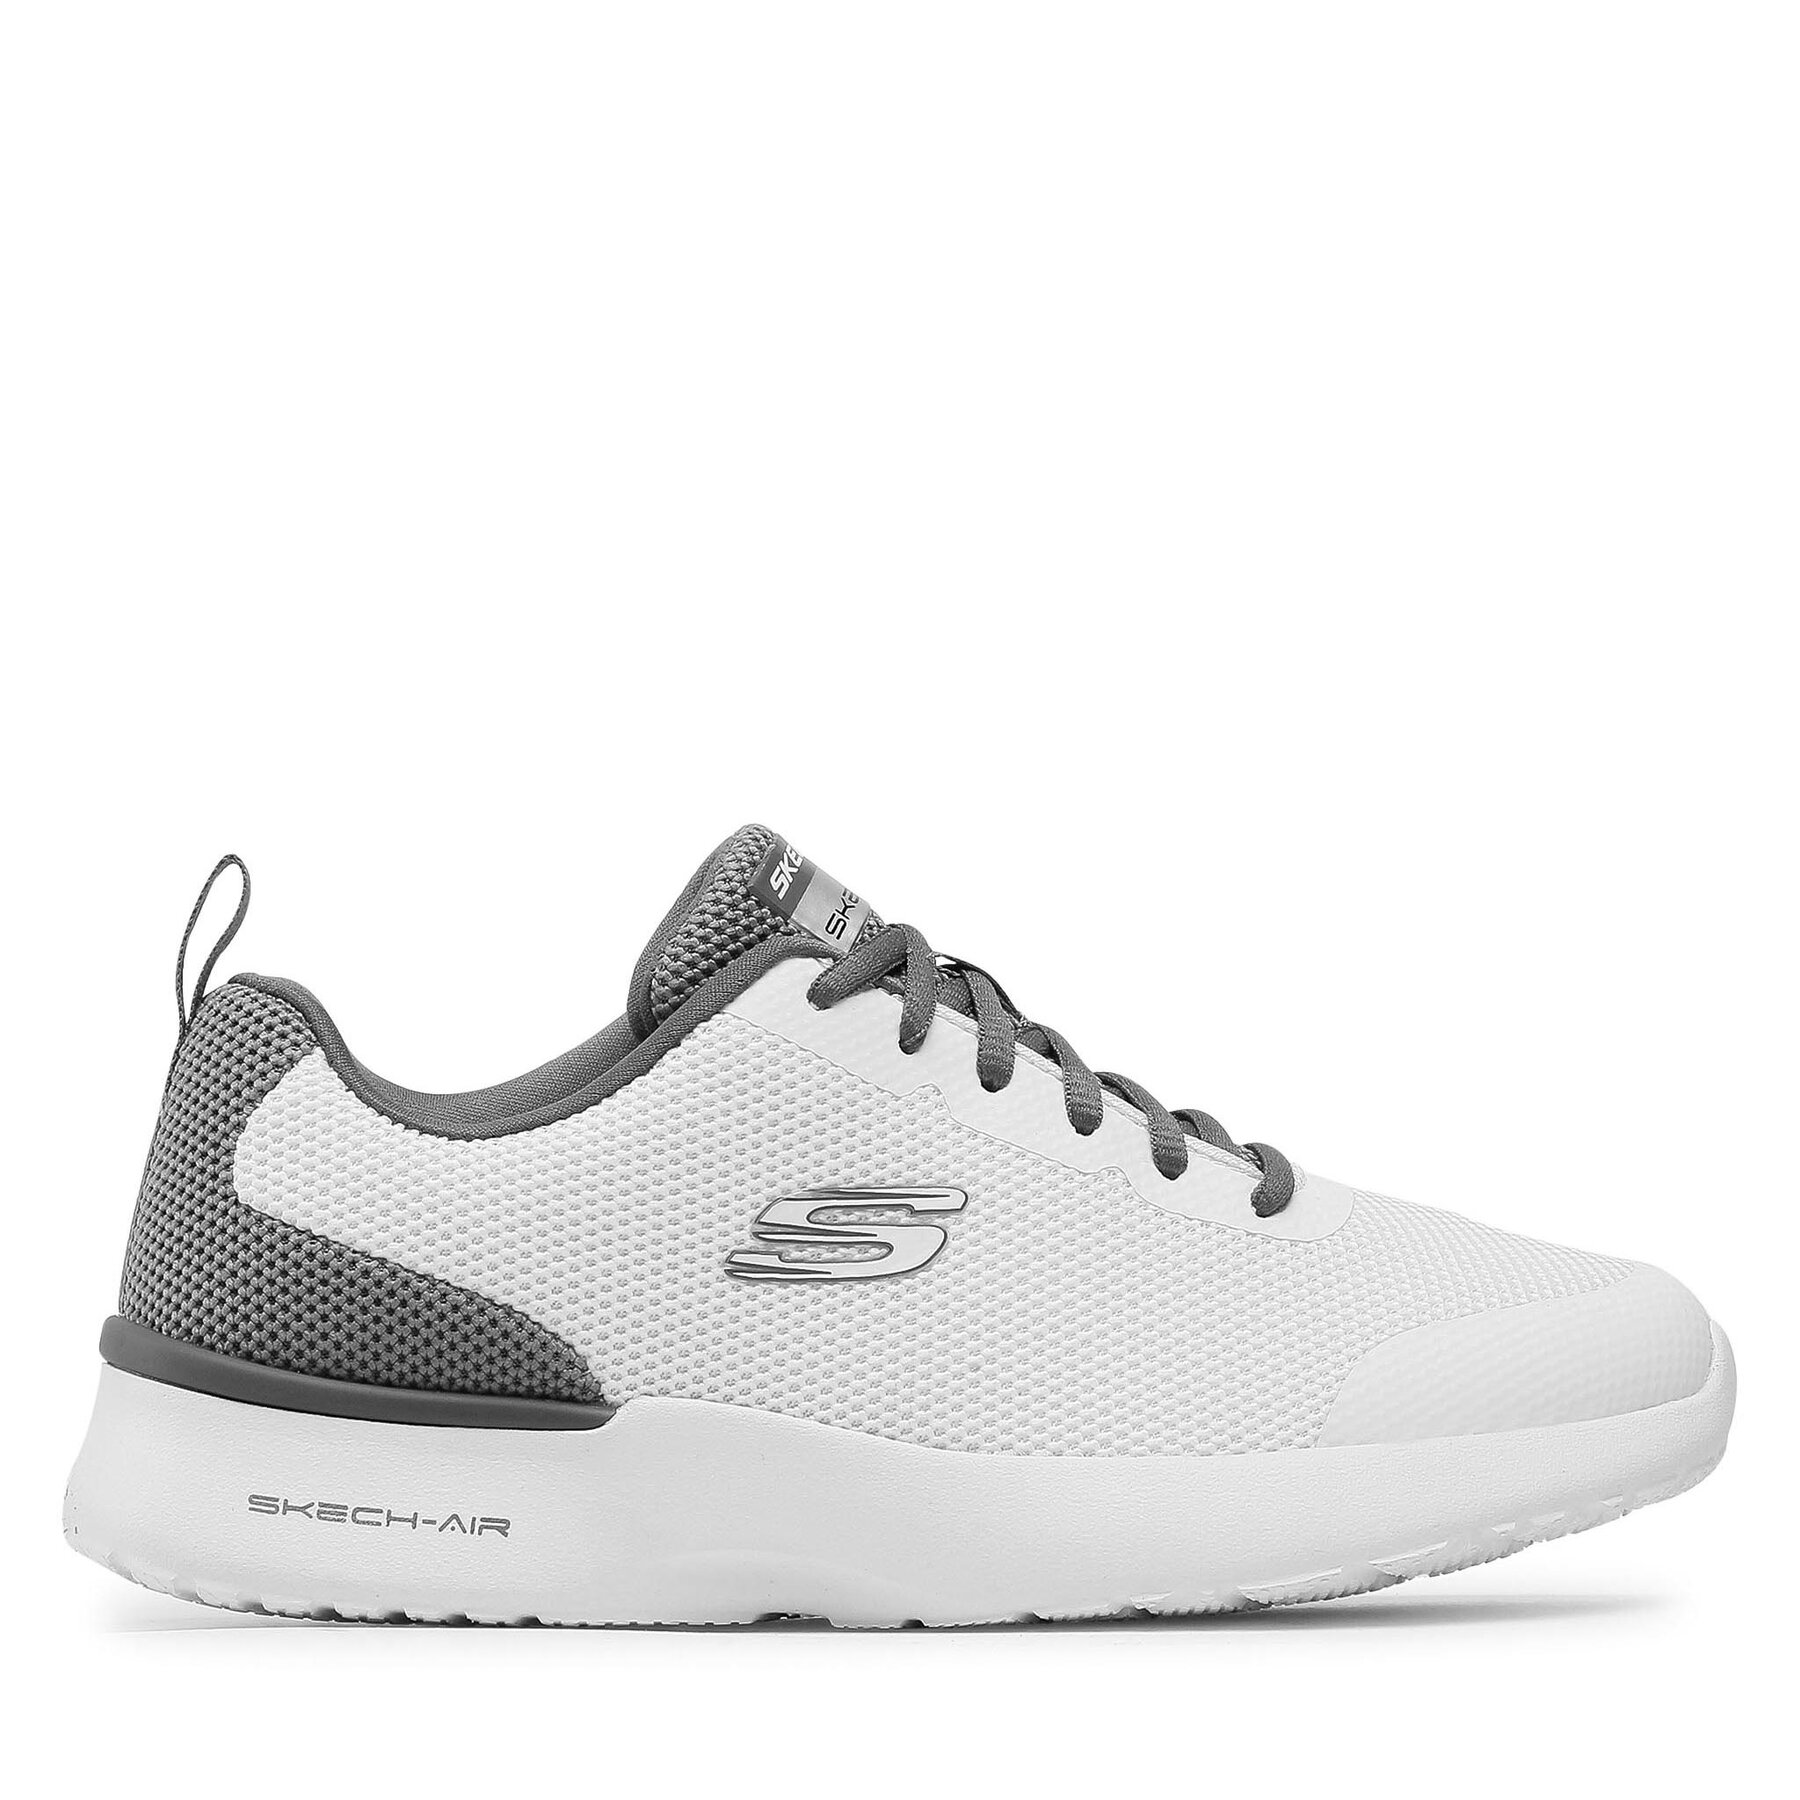 Skechers Skech-Air Dynamight Winly white/grey